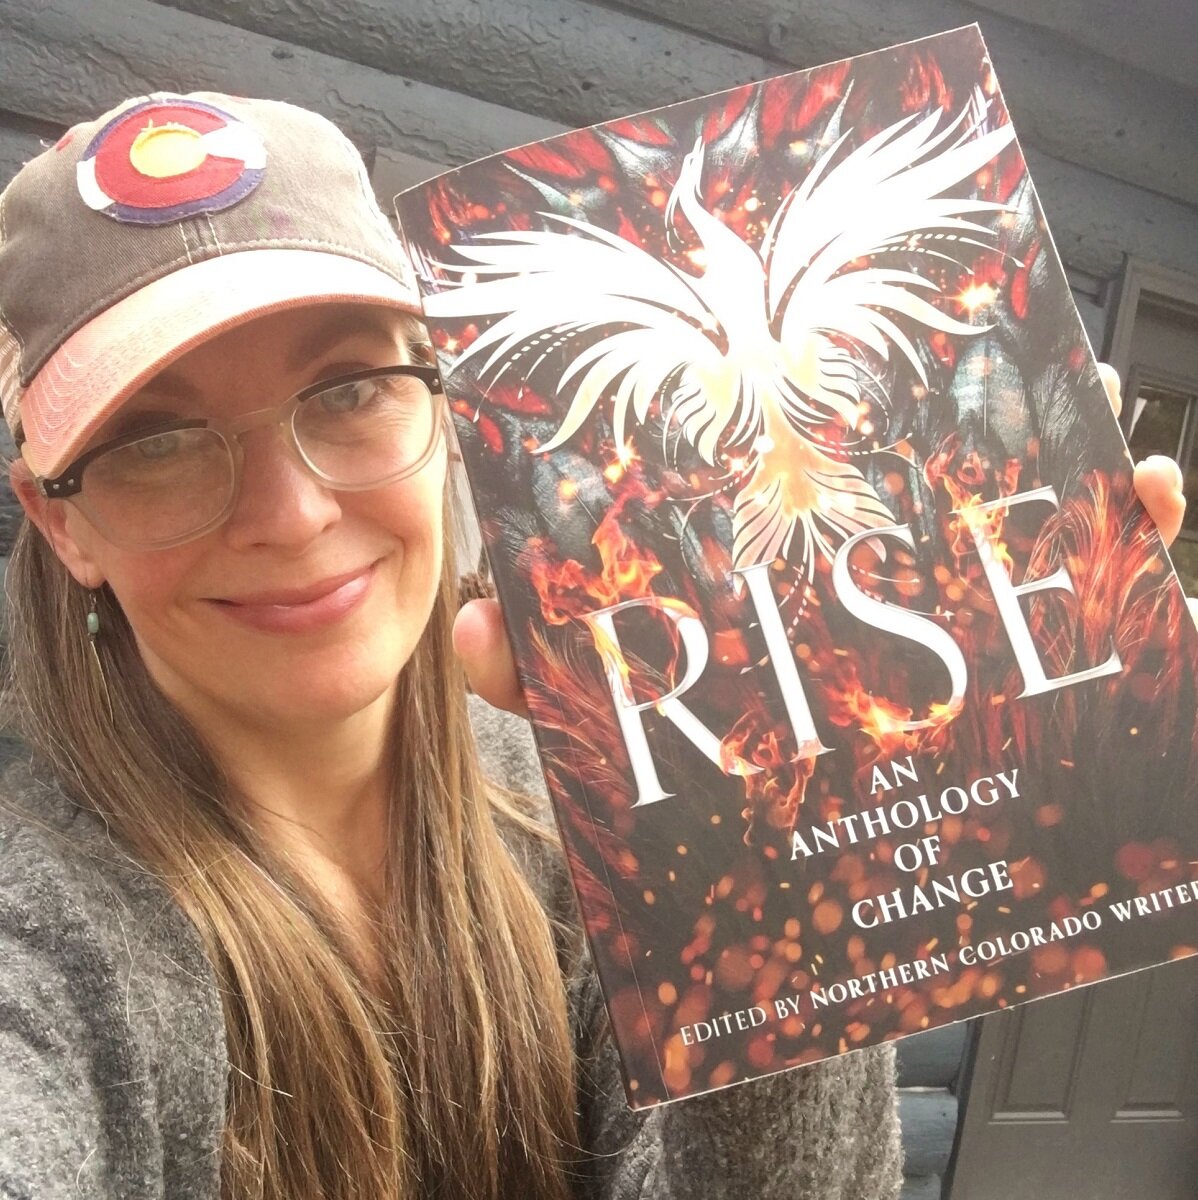 Rise: An Anthology of Change